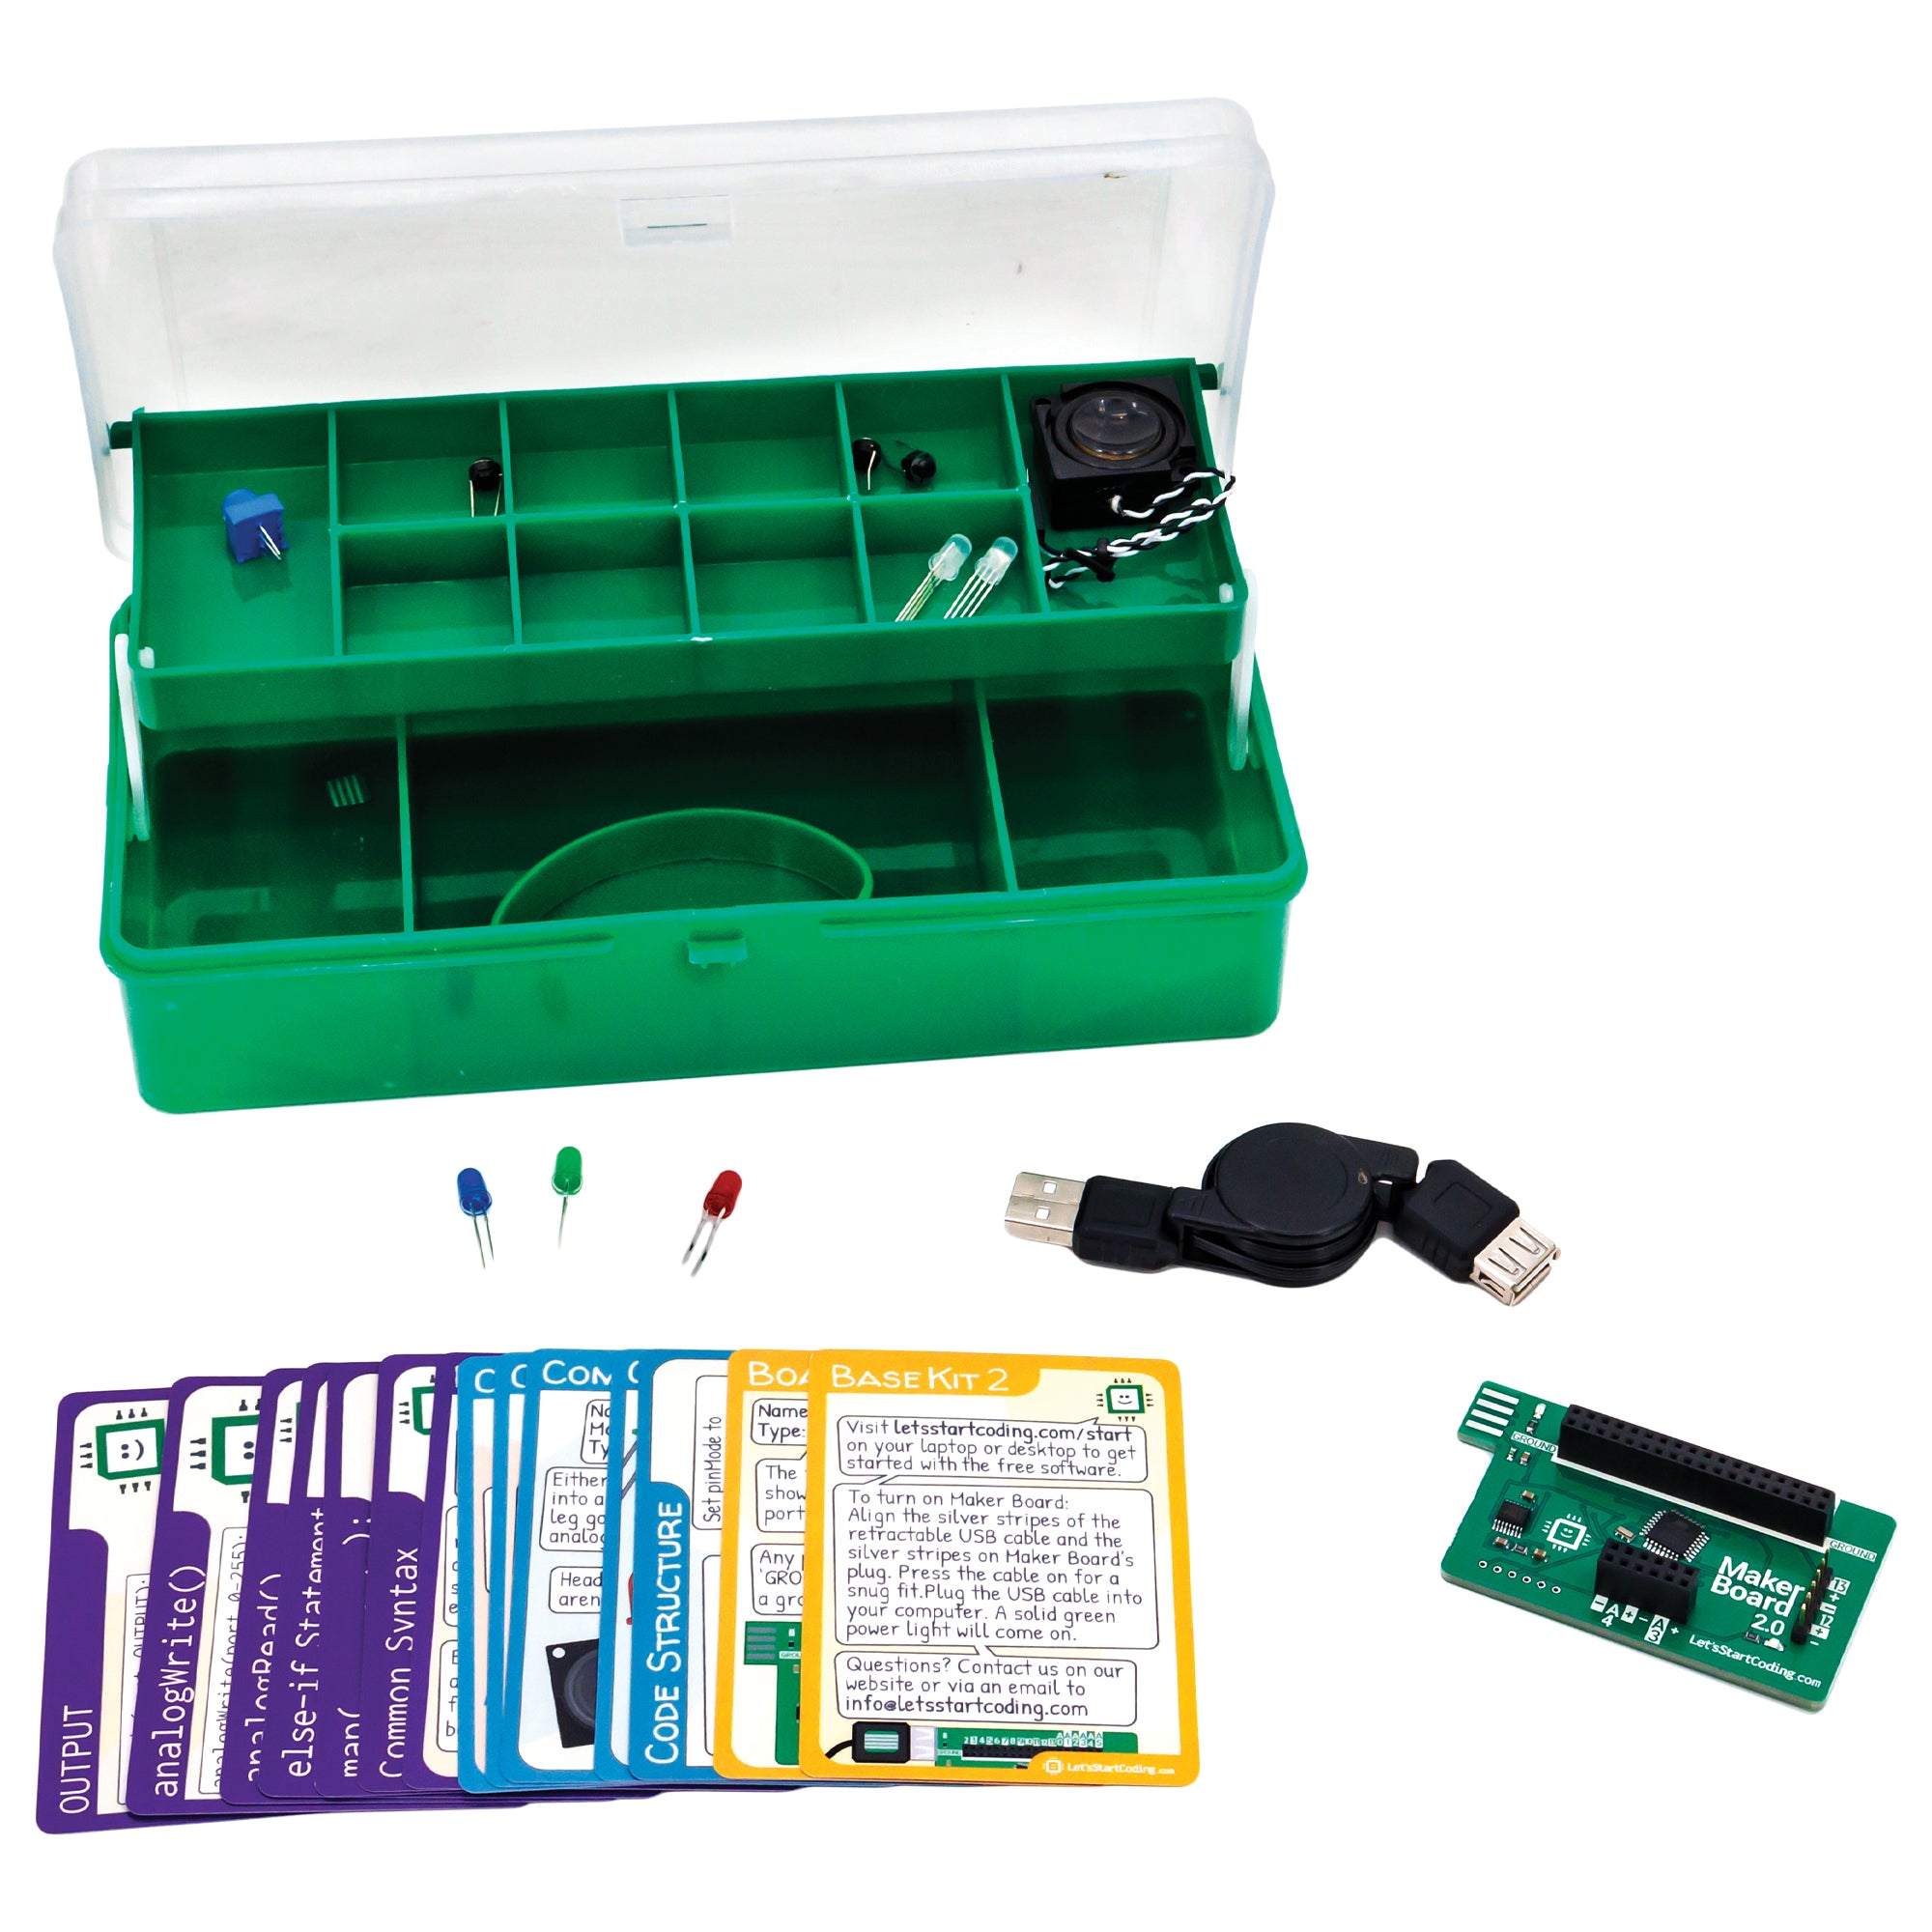 Let’s Start Coding Base Kit case with some contents spread out. The green and clear-lidded case is similar to a small tackle or bead box and contains L E D lights, turn knob, push buttons, and the speaker. On the white surface in front of the case if a retractable USB cord, 3 colored L E D lights, Maker Board, and reference cards.